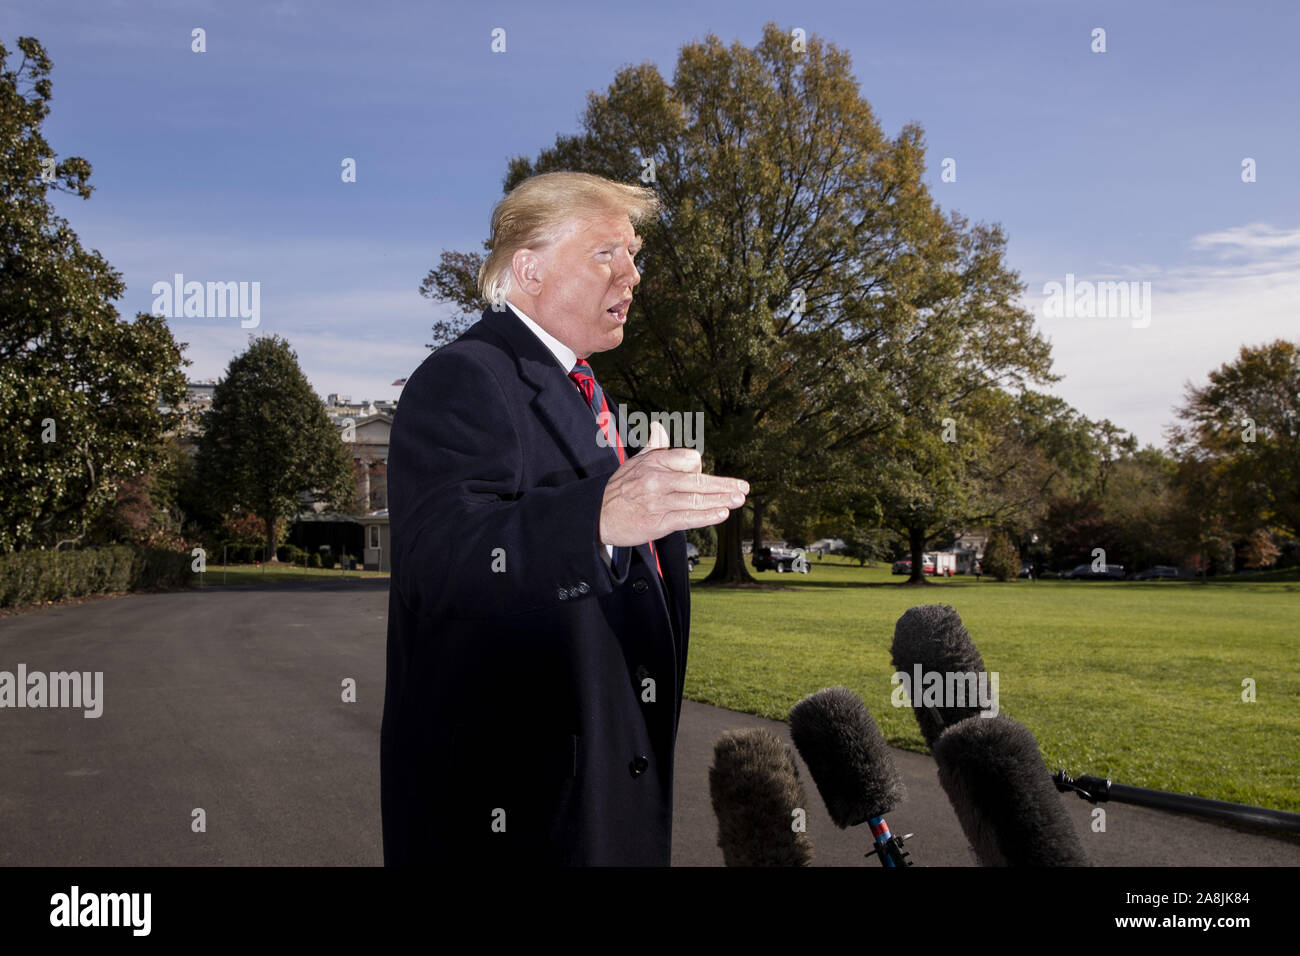 Washington, USA. 9th Nov, 2019. President Donald Trump delivers brief remarks to members of the news media before departing with first lady Melania Trump (not pictured) on the South Lawn of the White House in Washington, DC, on Saturday, November 9, 2019. The president and first lady will attend a National Collegiate Athletic Association (NCAA) football game between Alabama and Louisiana State University in Tuscaloosa, Alabama, and then stay in New York City through Veterans Day. Photo by Michael Reynolds/UPI Credit: UPI/Alamy Live News Stock Photo